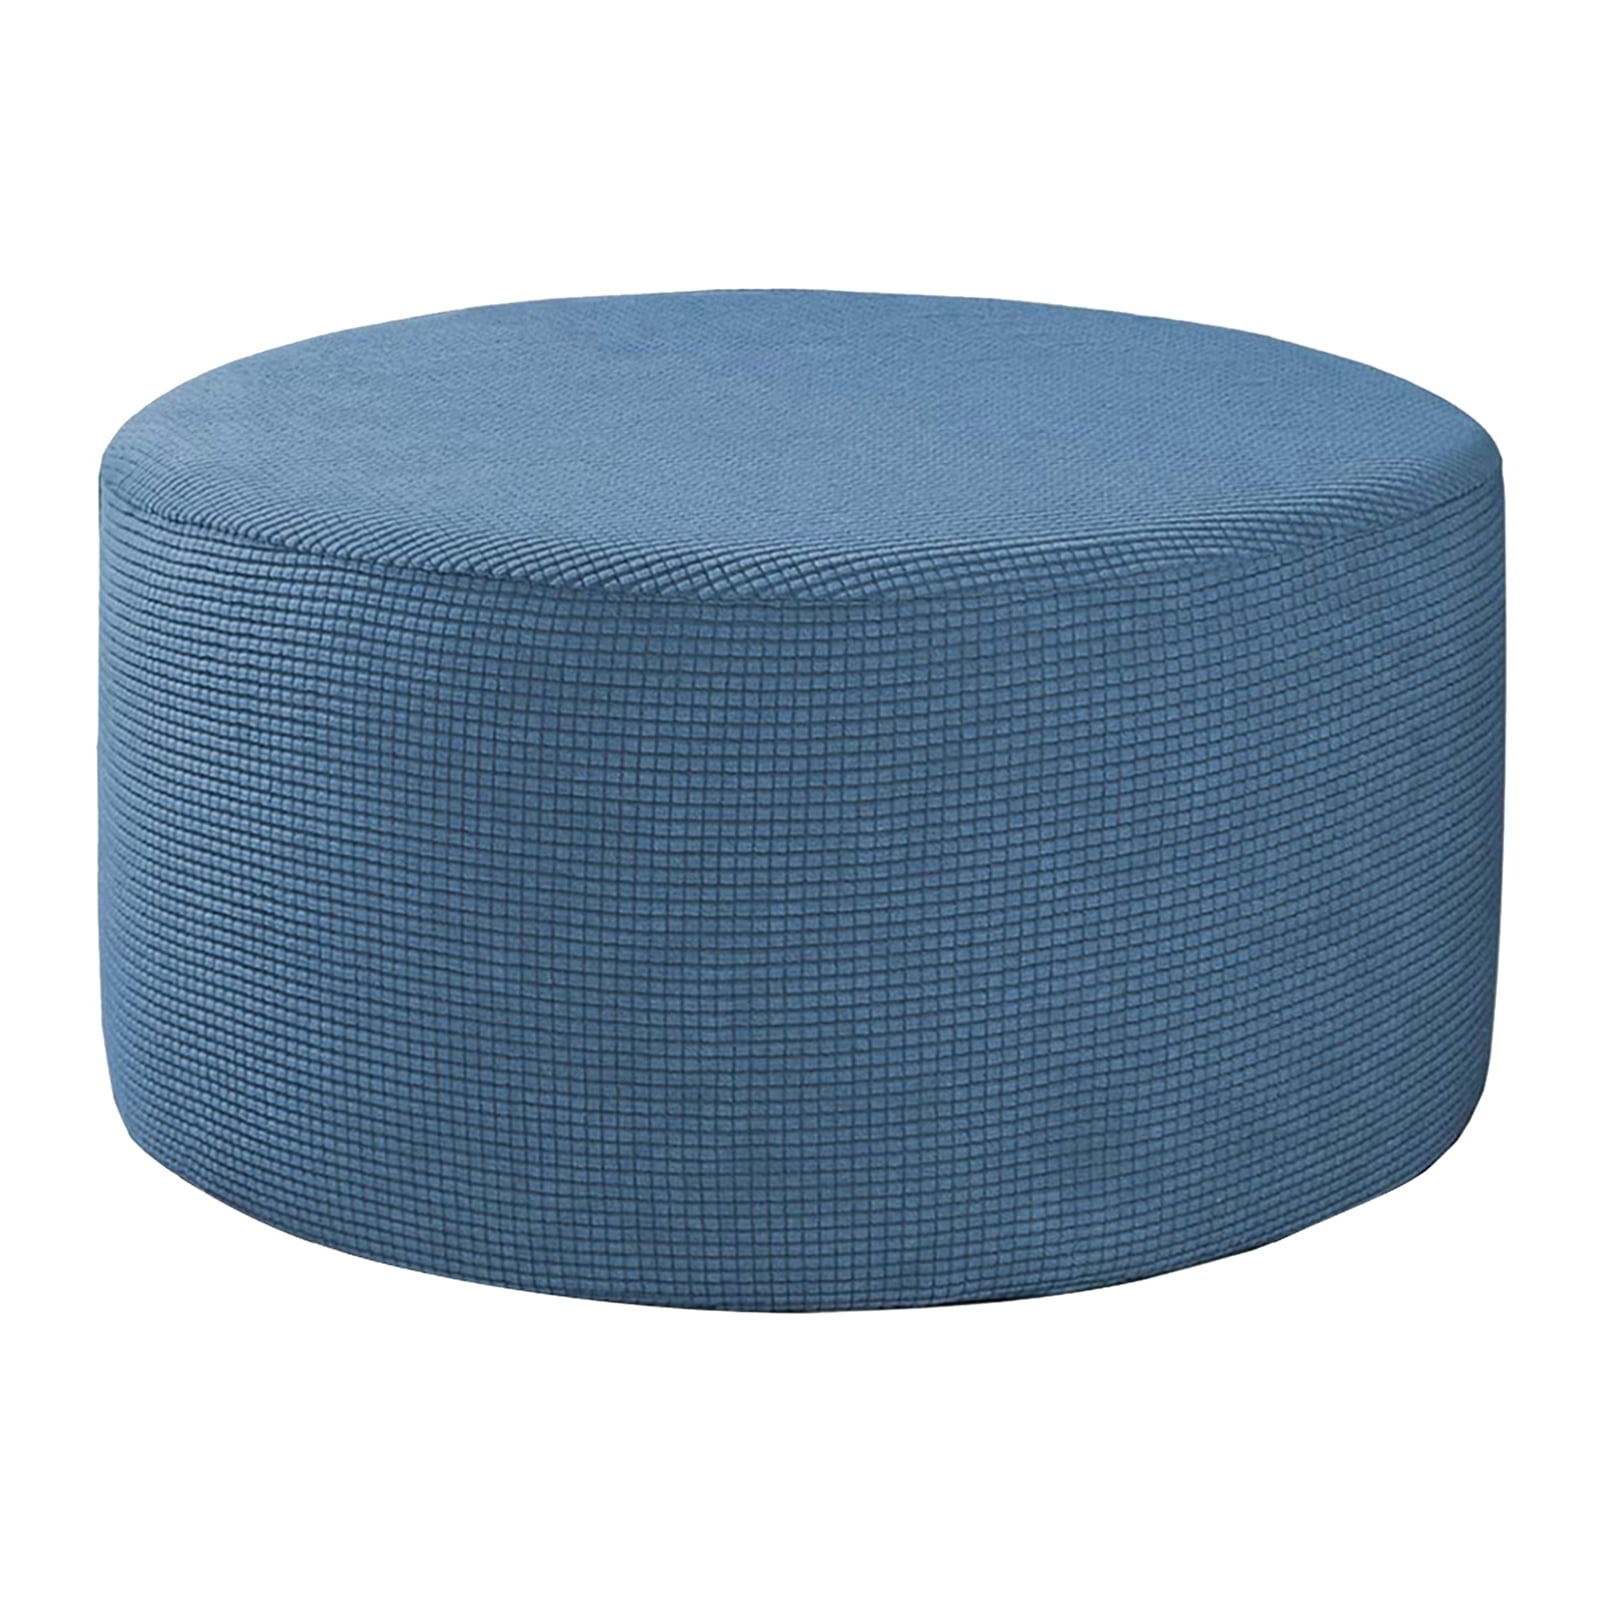 Round Ottoman Slipcover Footstool Protector Covers Storage Ottoman Cover Stretch 